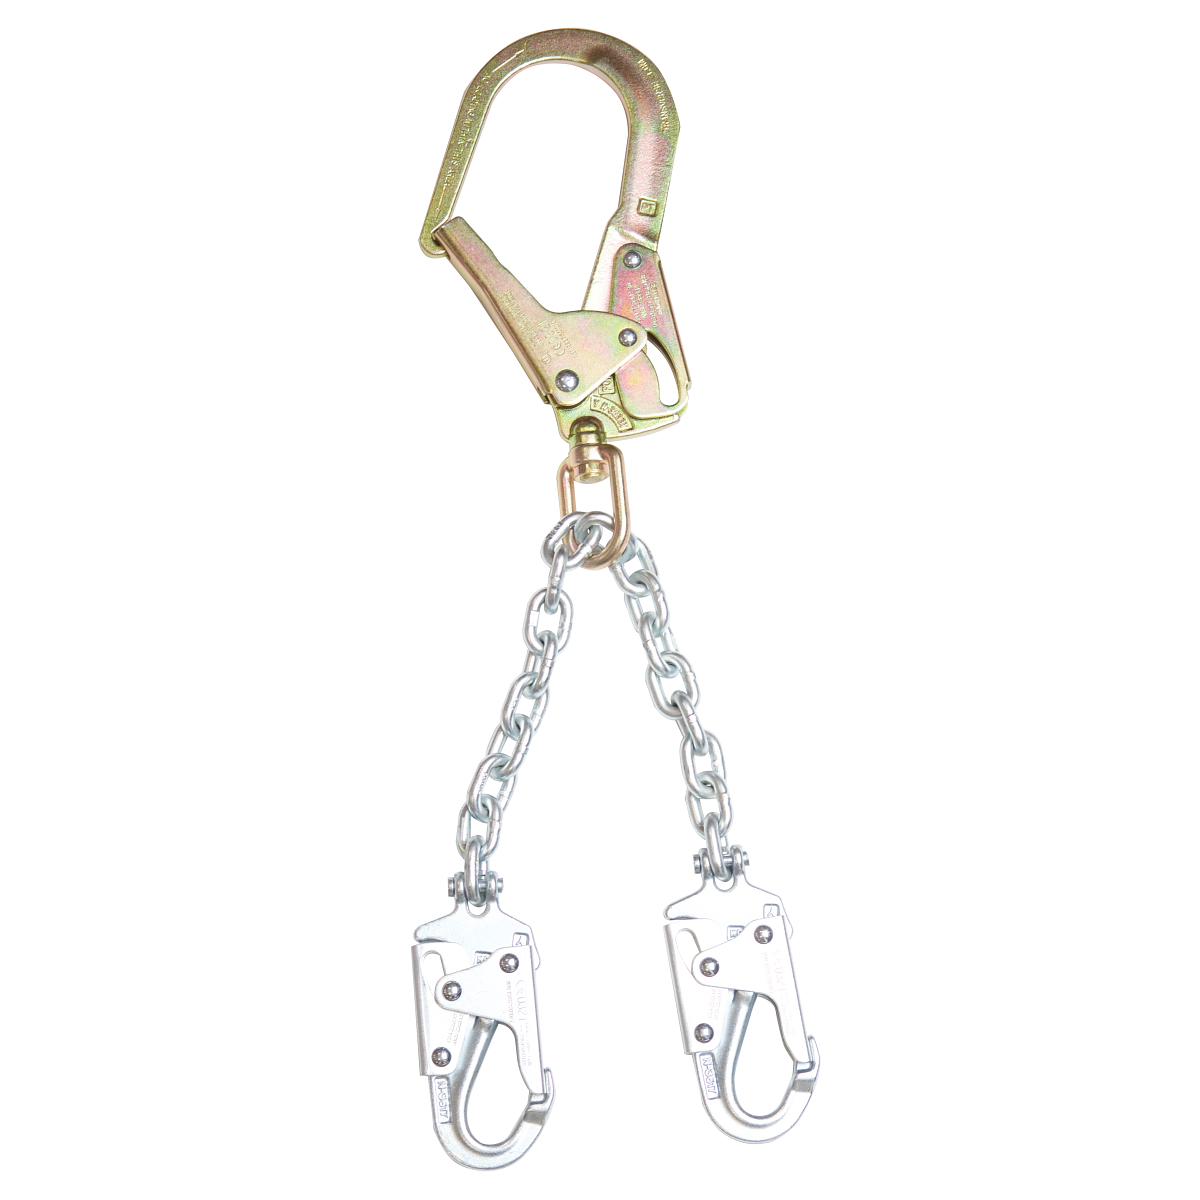 Guardian 01616 24 inch swivel rebar chain assembly with rebar hook on one  end and self-locking snaphooks on the other end.